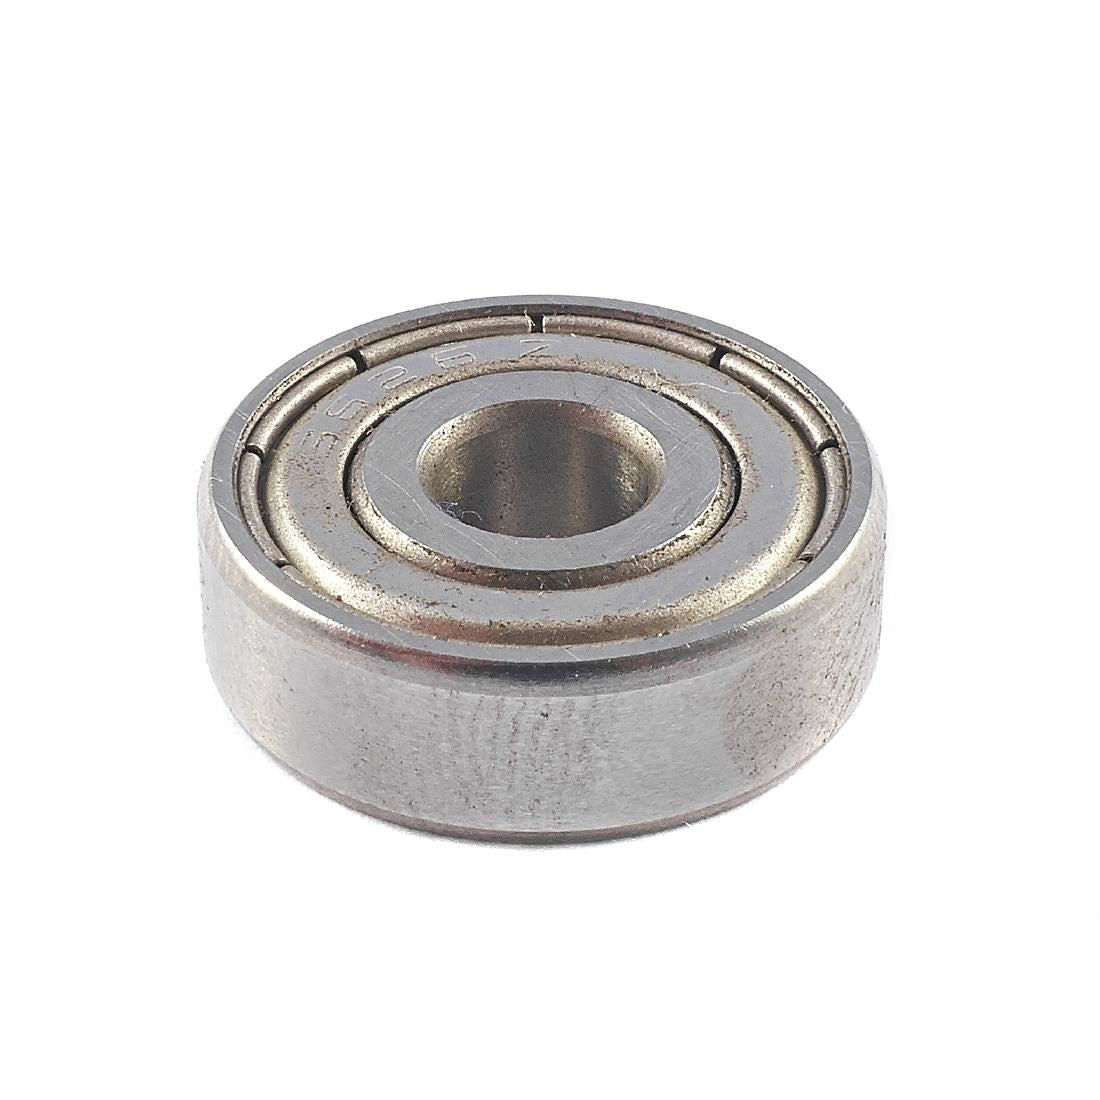 AA130 Polar Axletree Bearing for T317 and T318